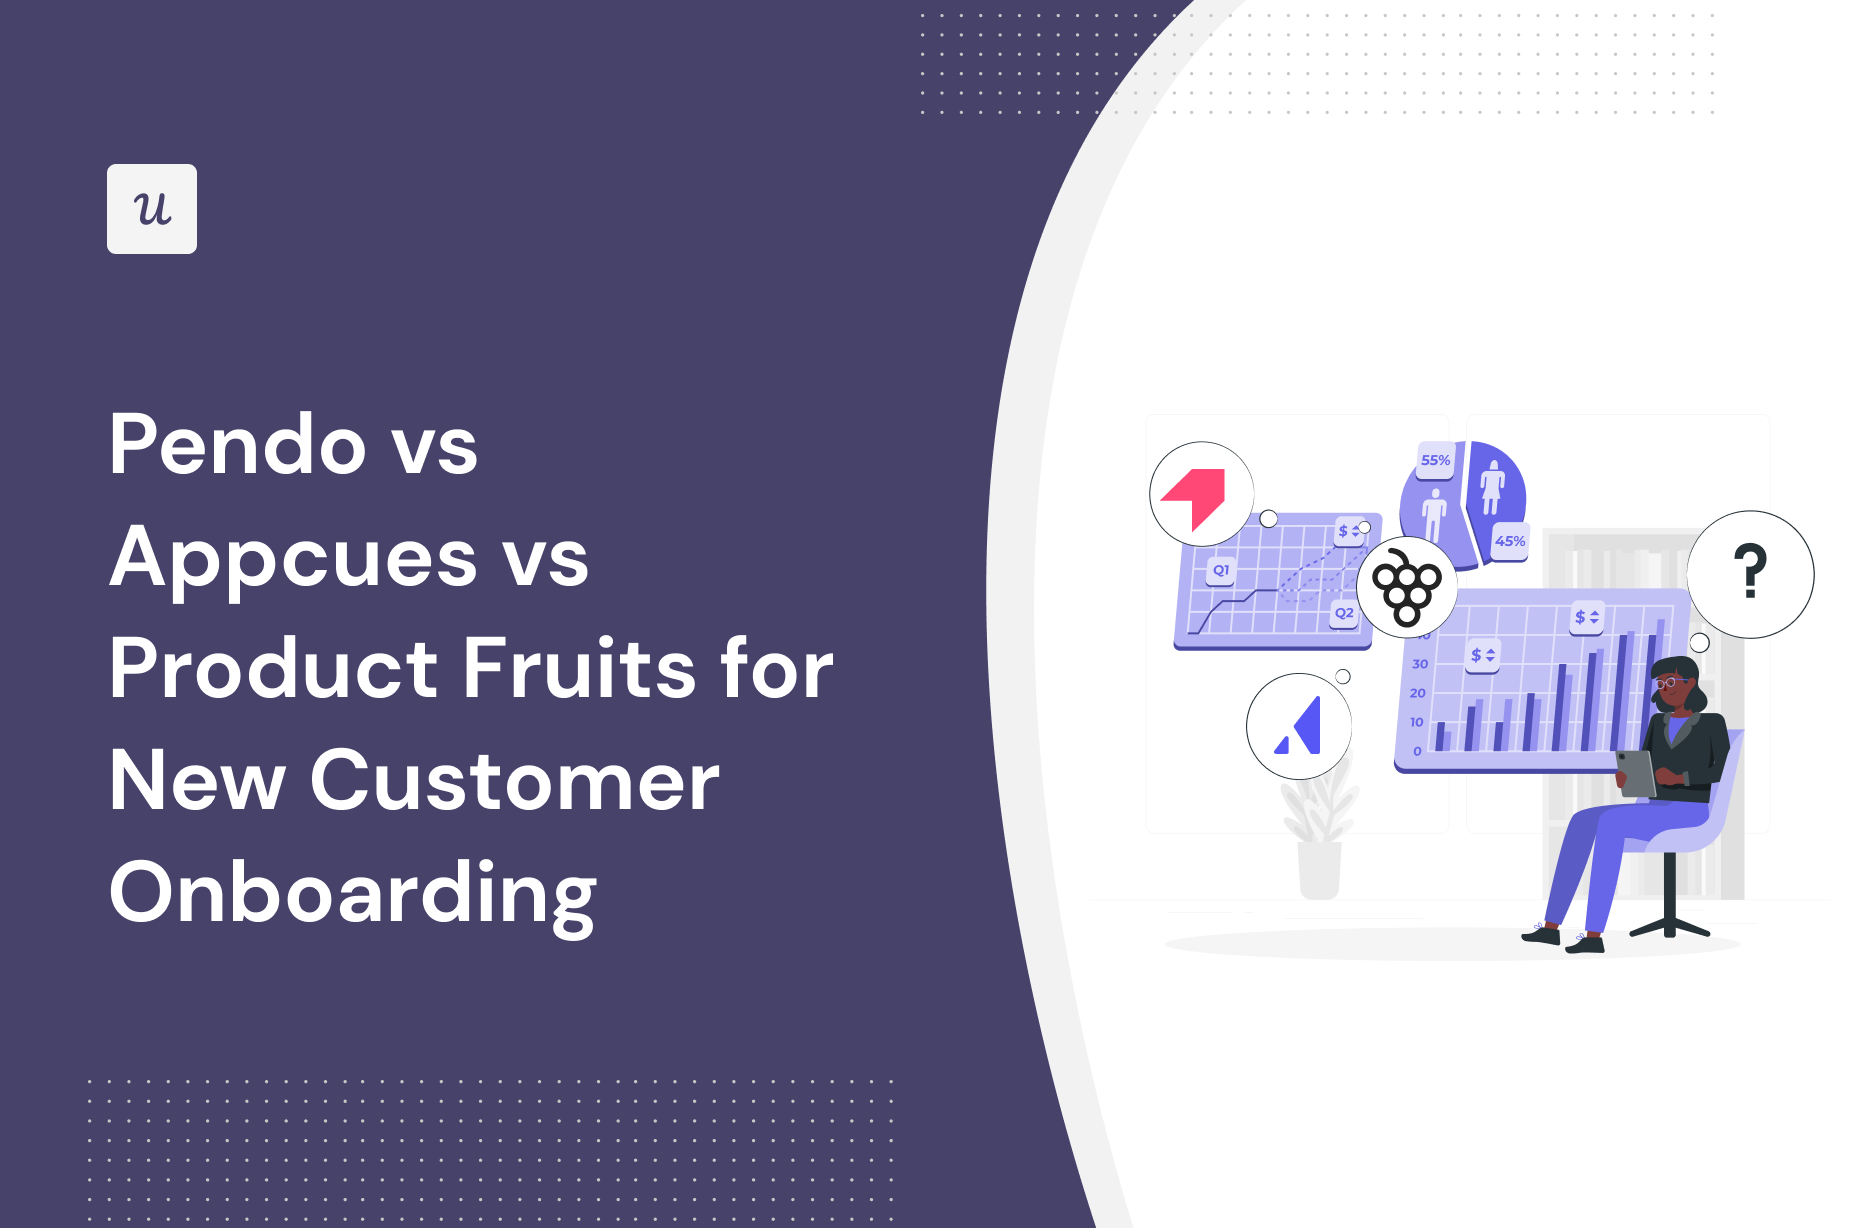 Pendo vs Appcues vs Product Fruits for New Customer Onboarding